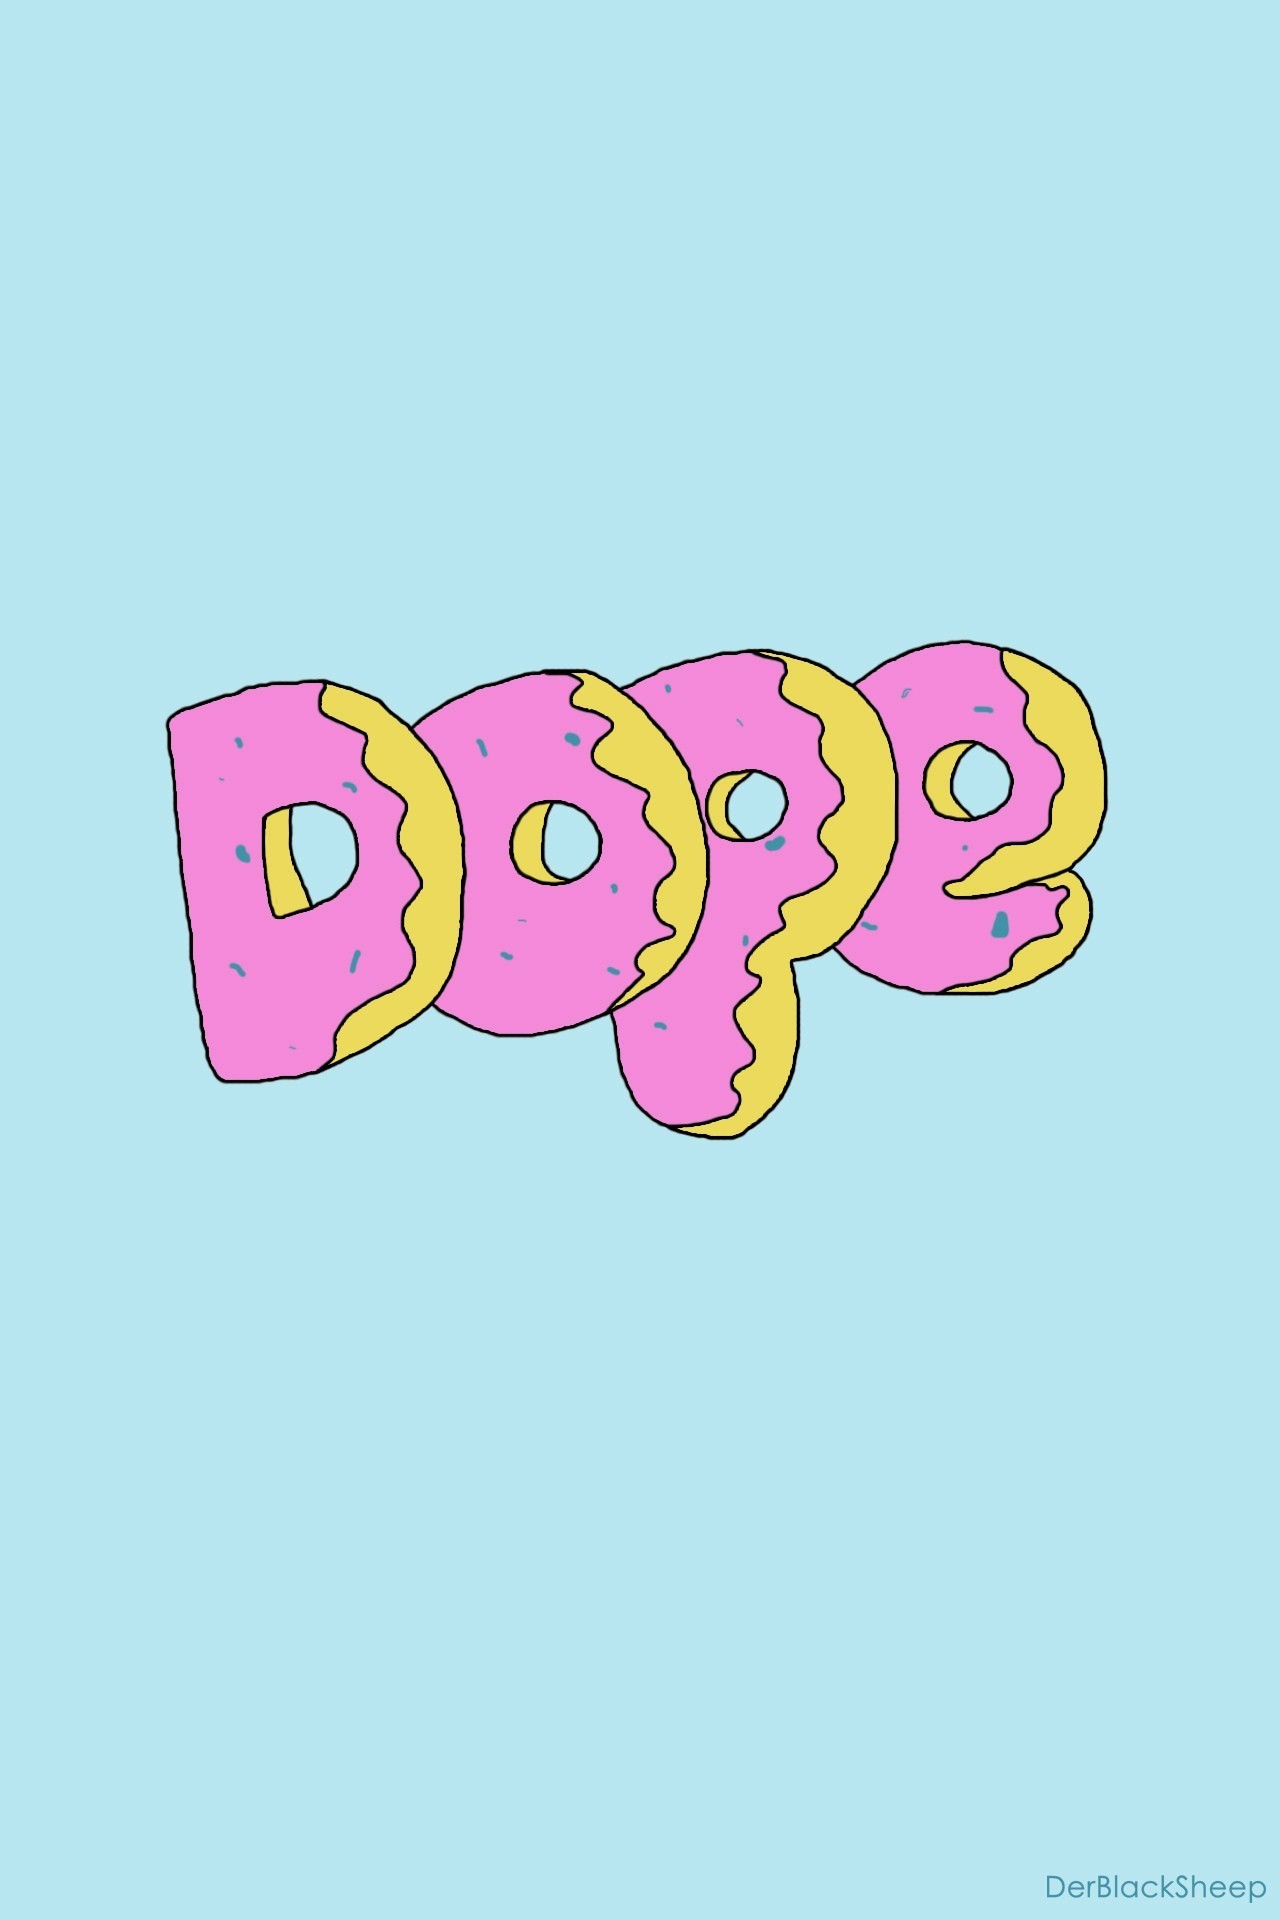 cool odd future wallpapers